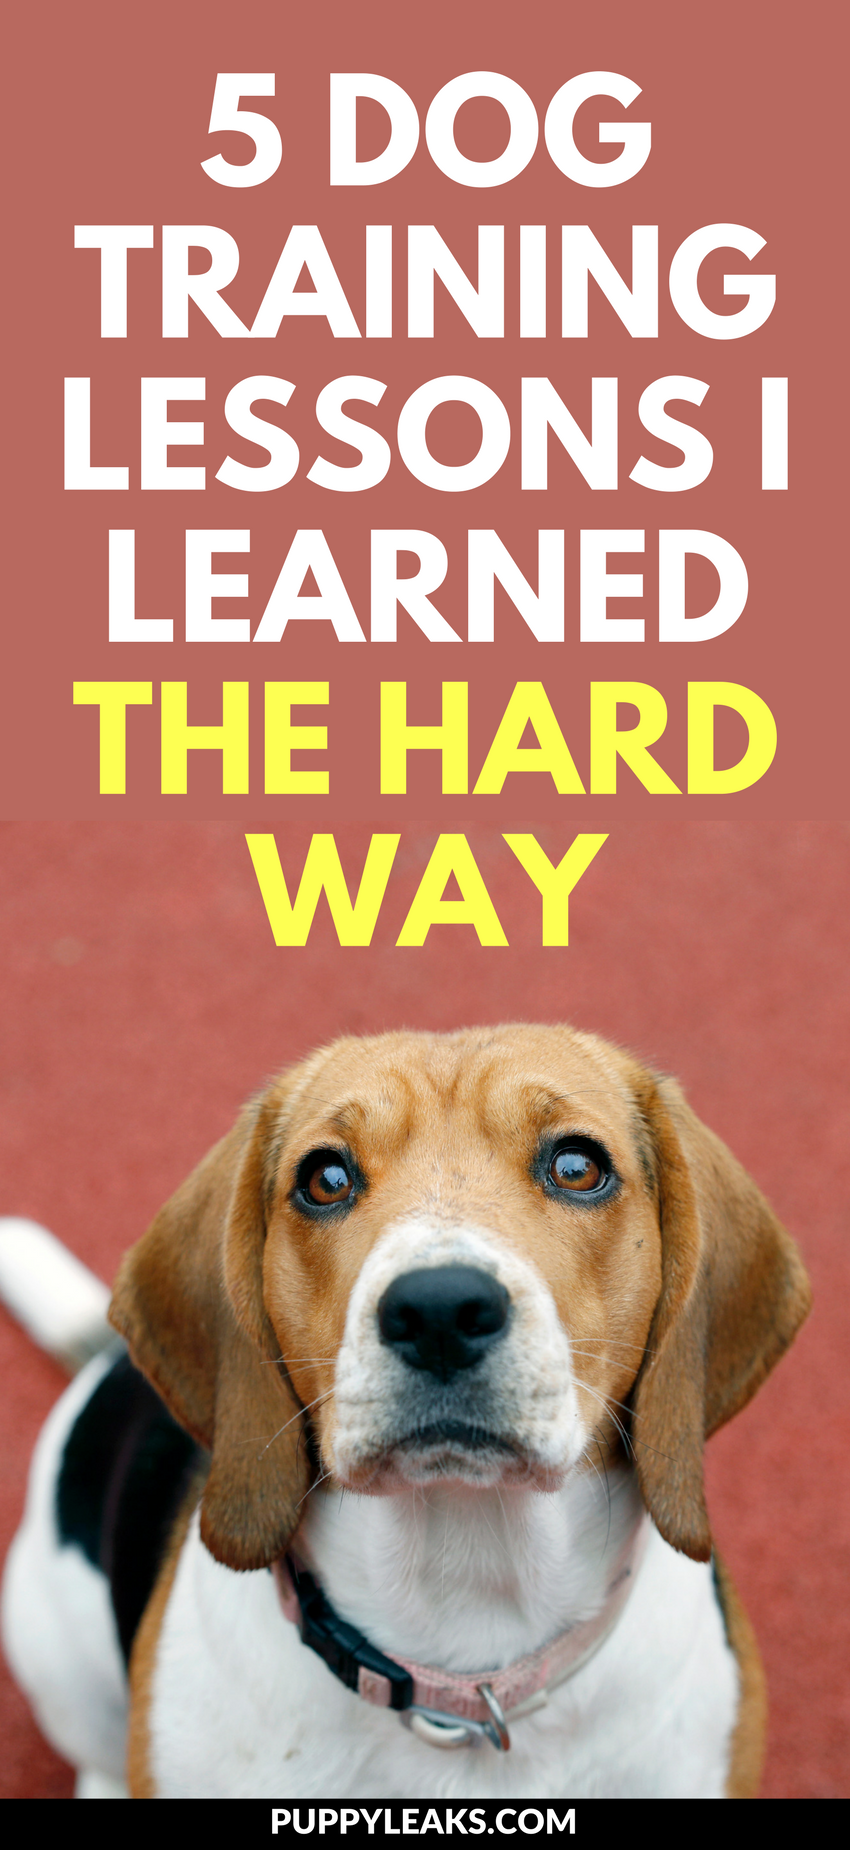 Dog Training Lessons I Learned The Hard Way